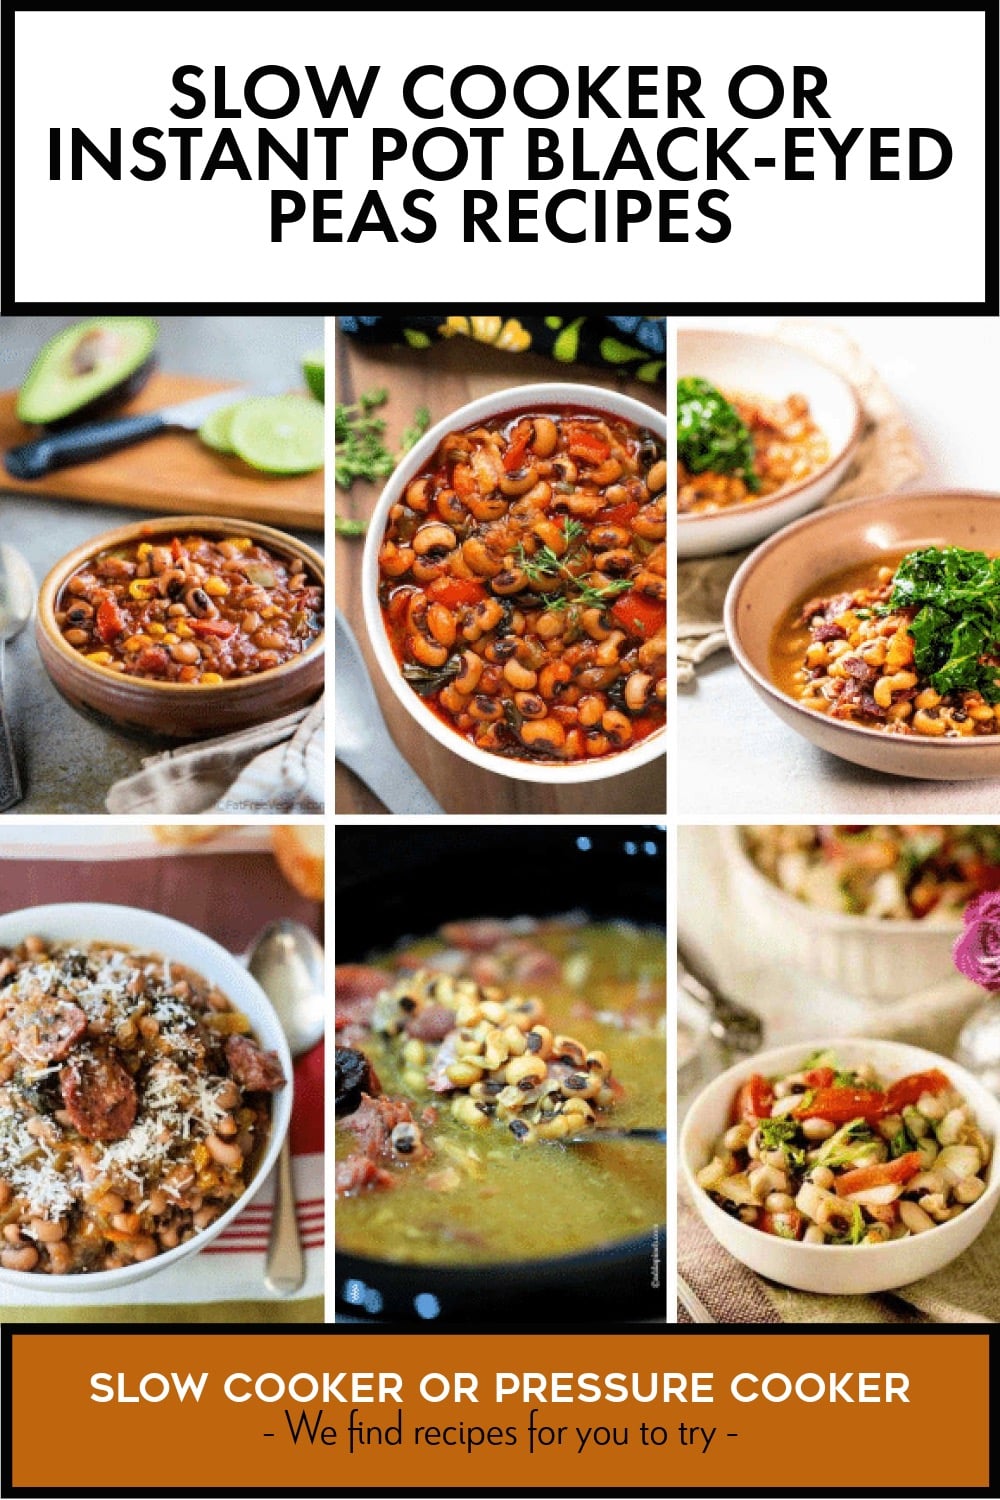 Pinterest image of Slow Cooker or Instant Pot Black-Eyed Peas Recipes